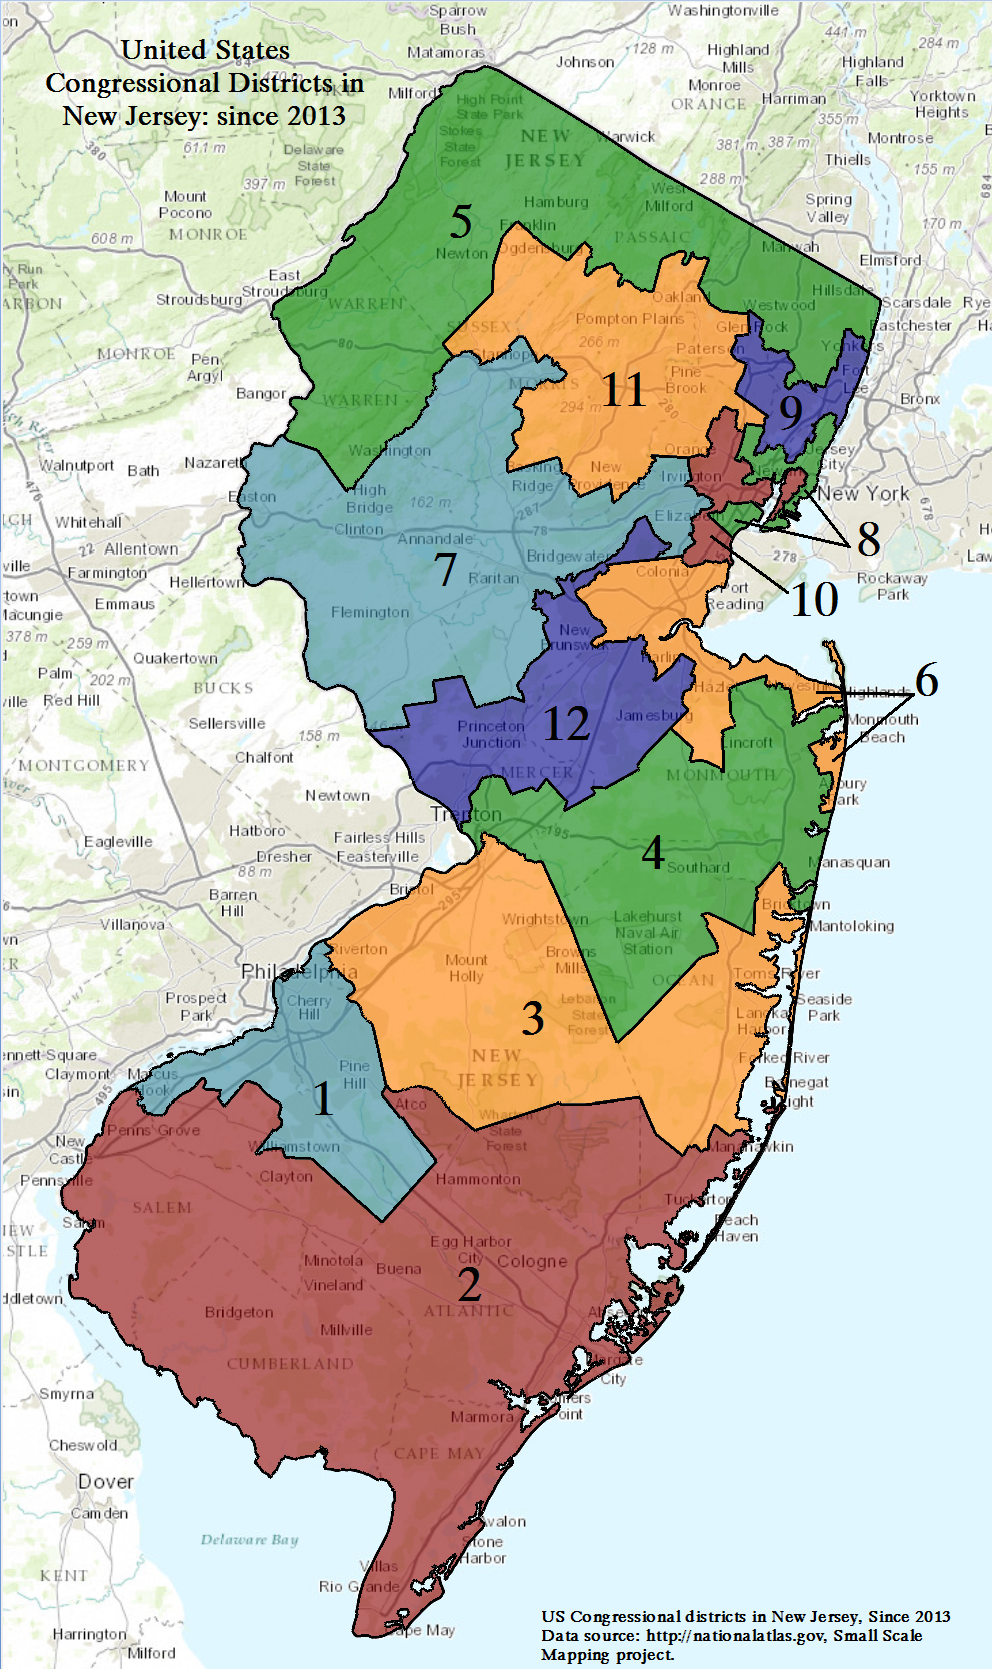 New Jersey congressional districts from 2013 to 2023